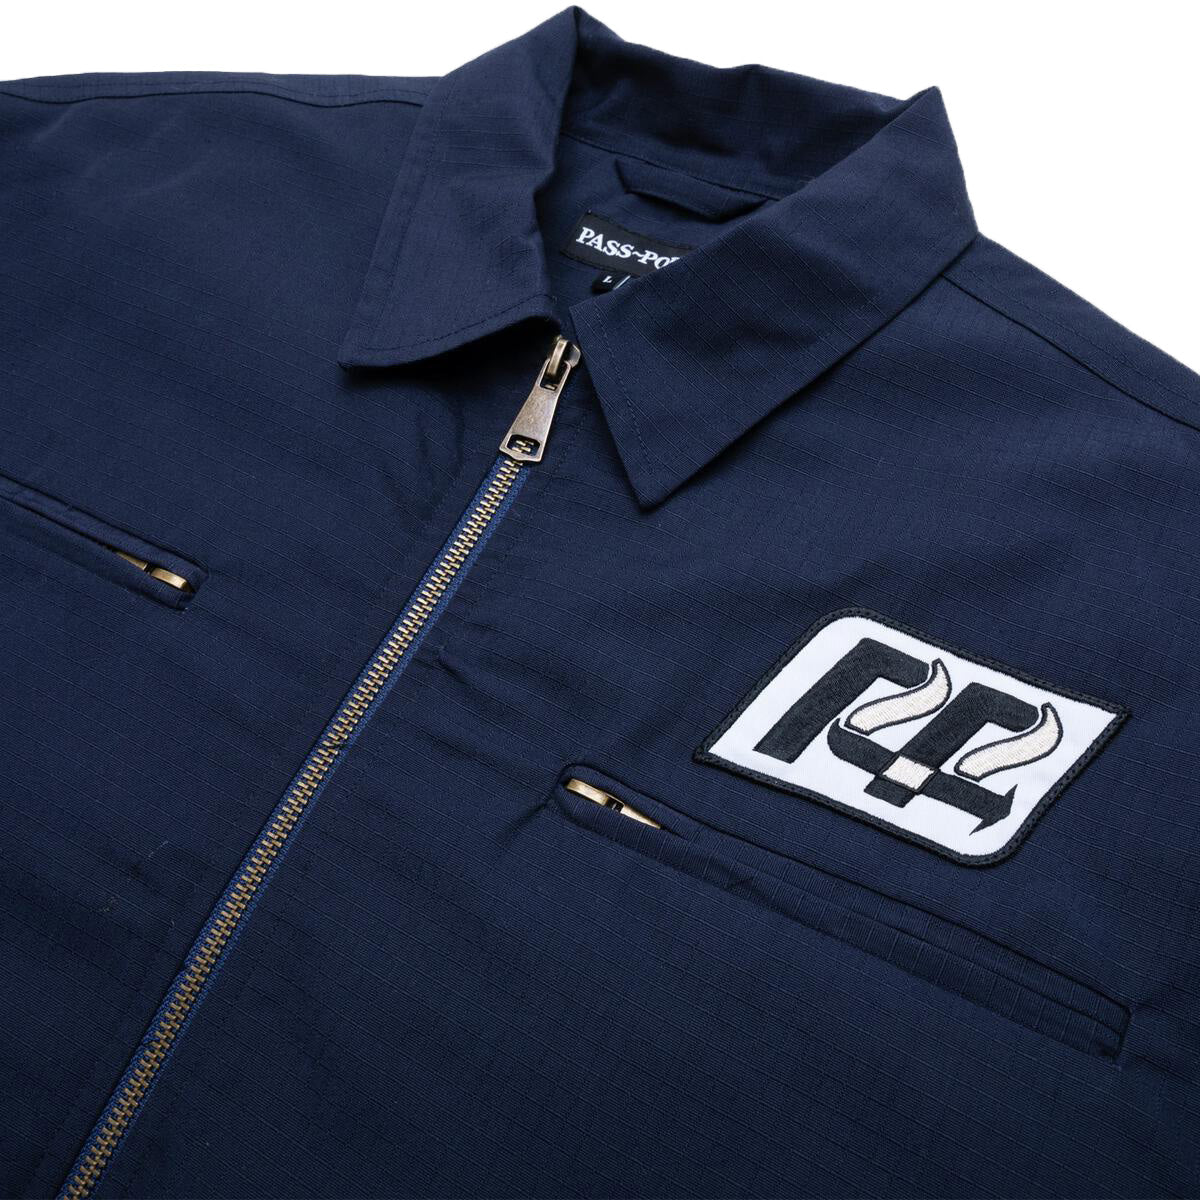 Transport Ripstop Delivery Jacket, Navy